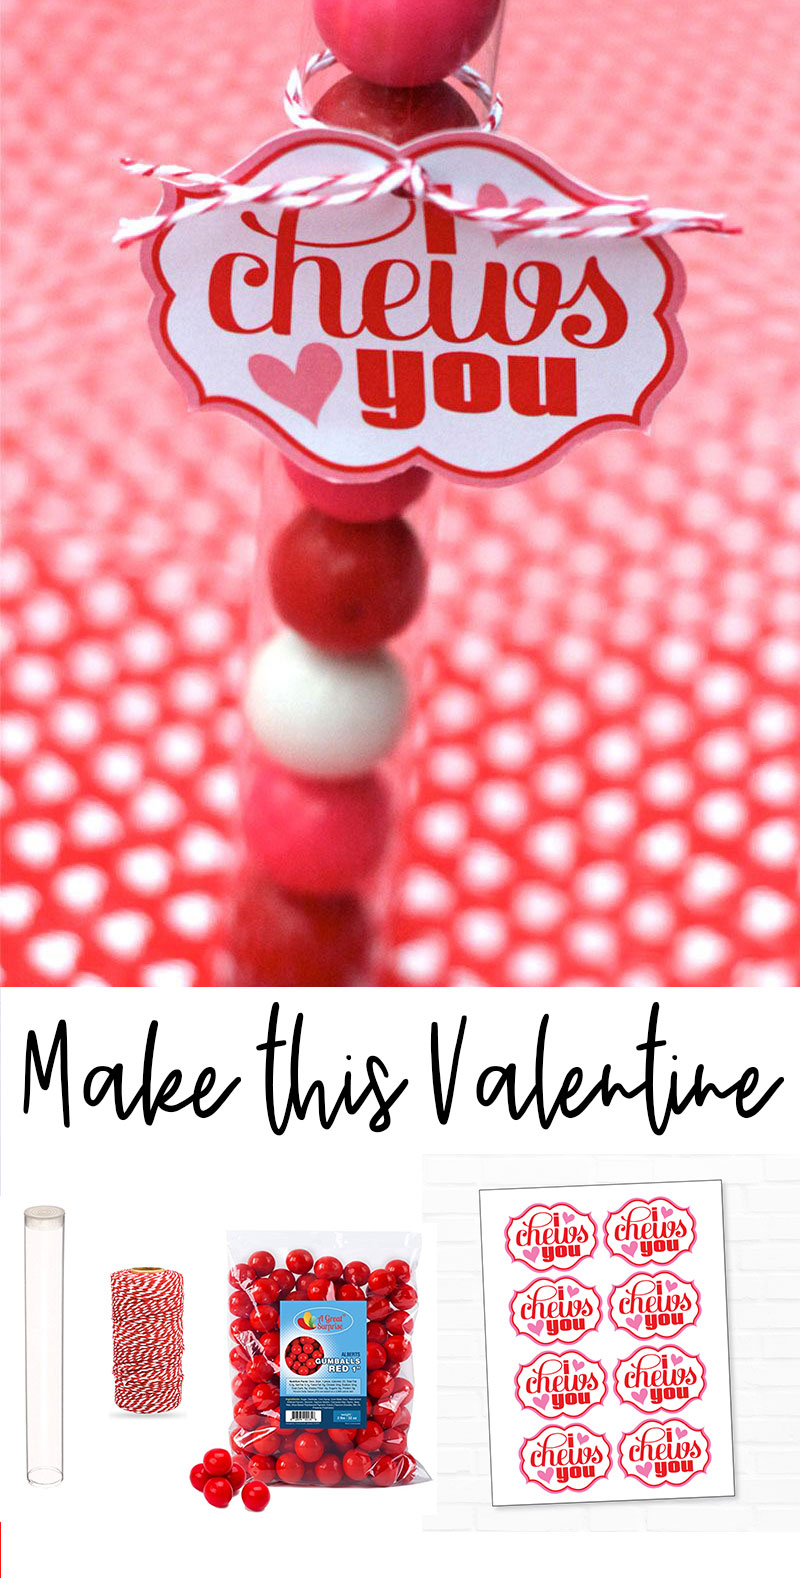 I Chews You DIY Valentine Idea by Love The Day